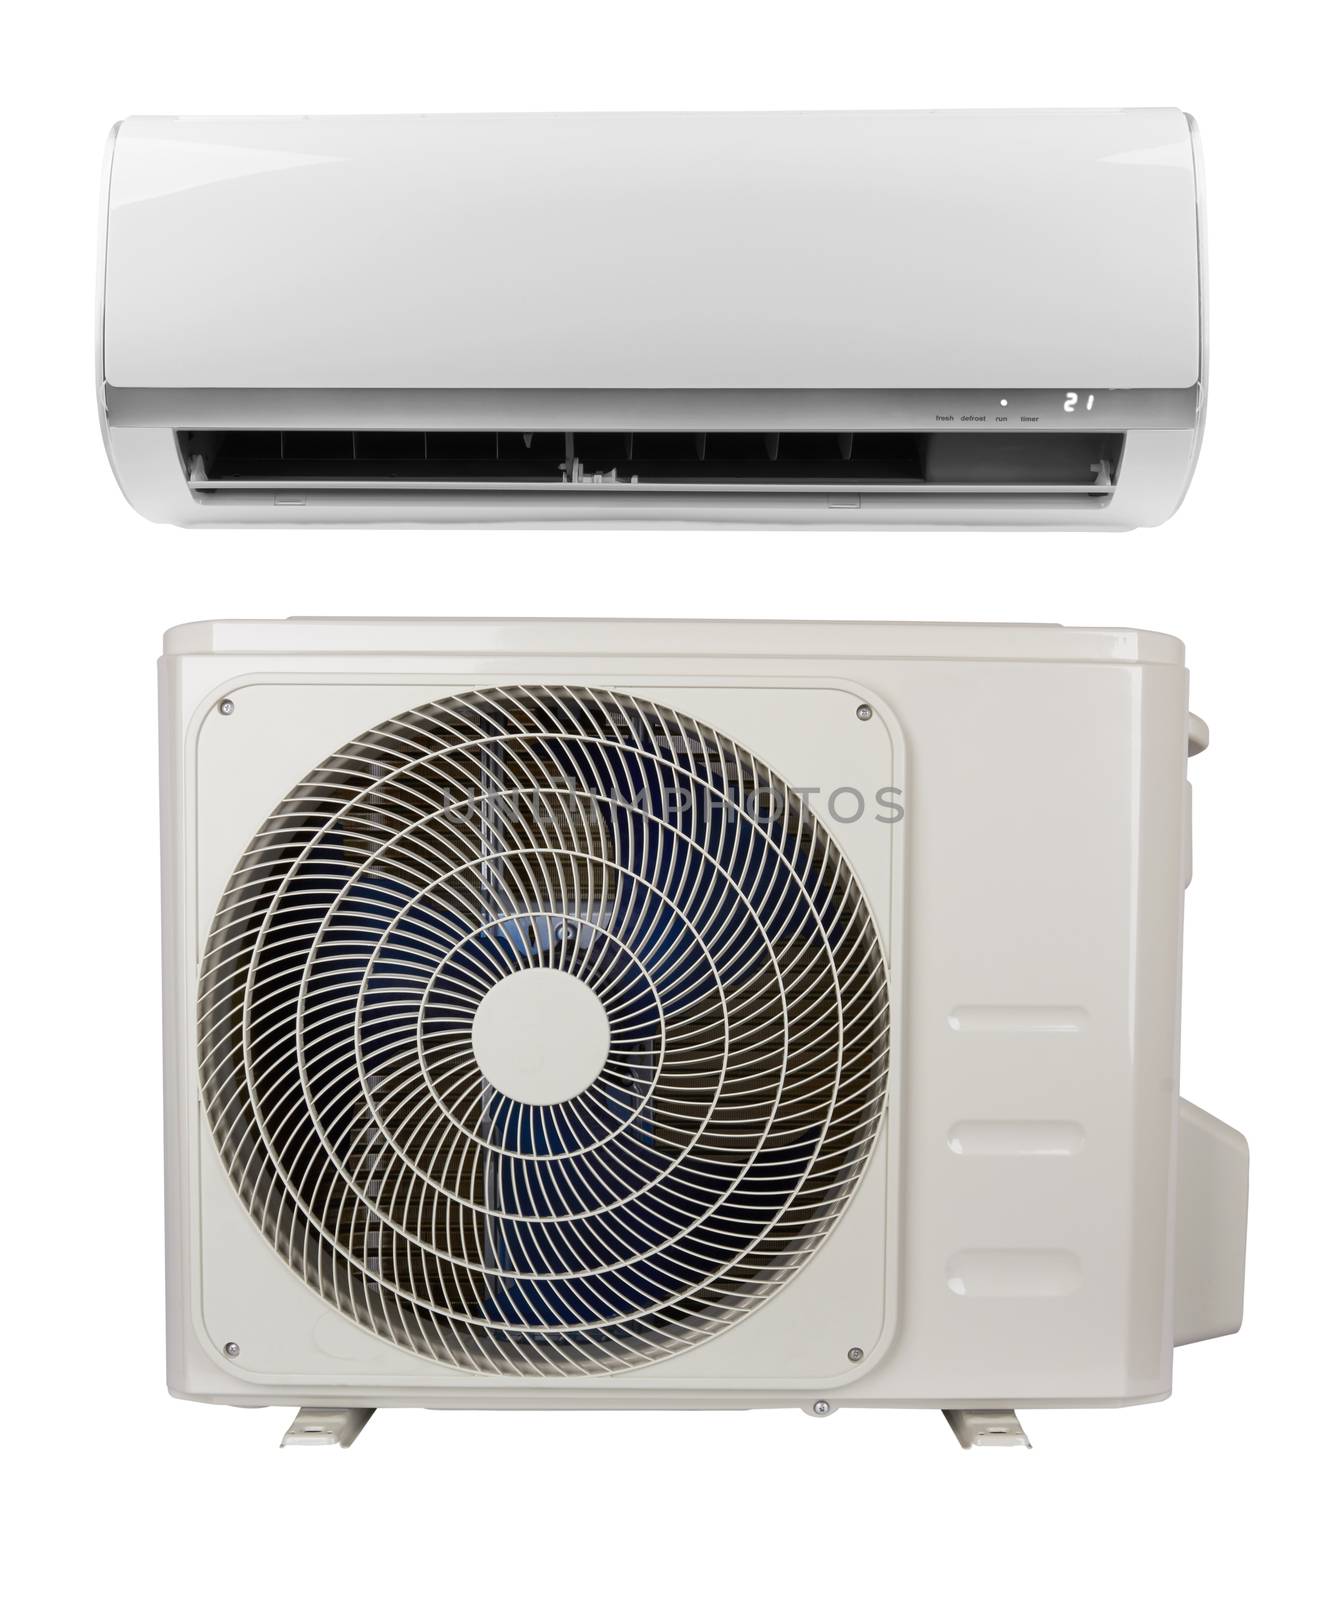 air conditioner on white by pioneer111